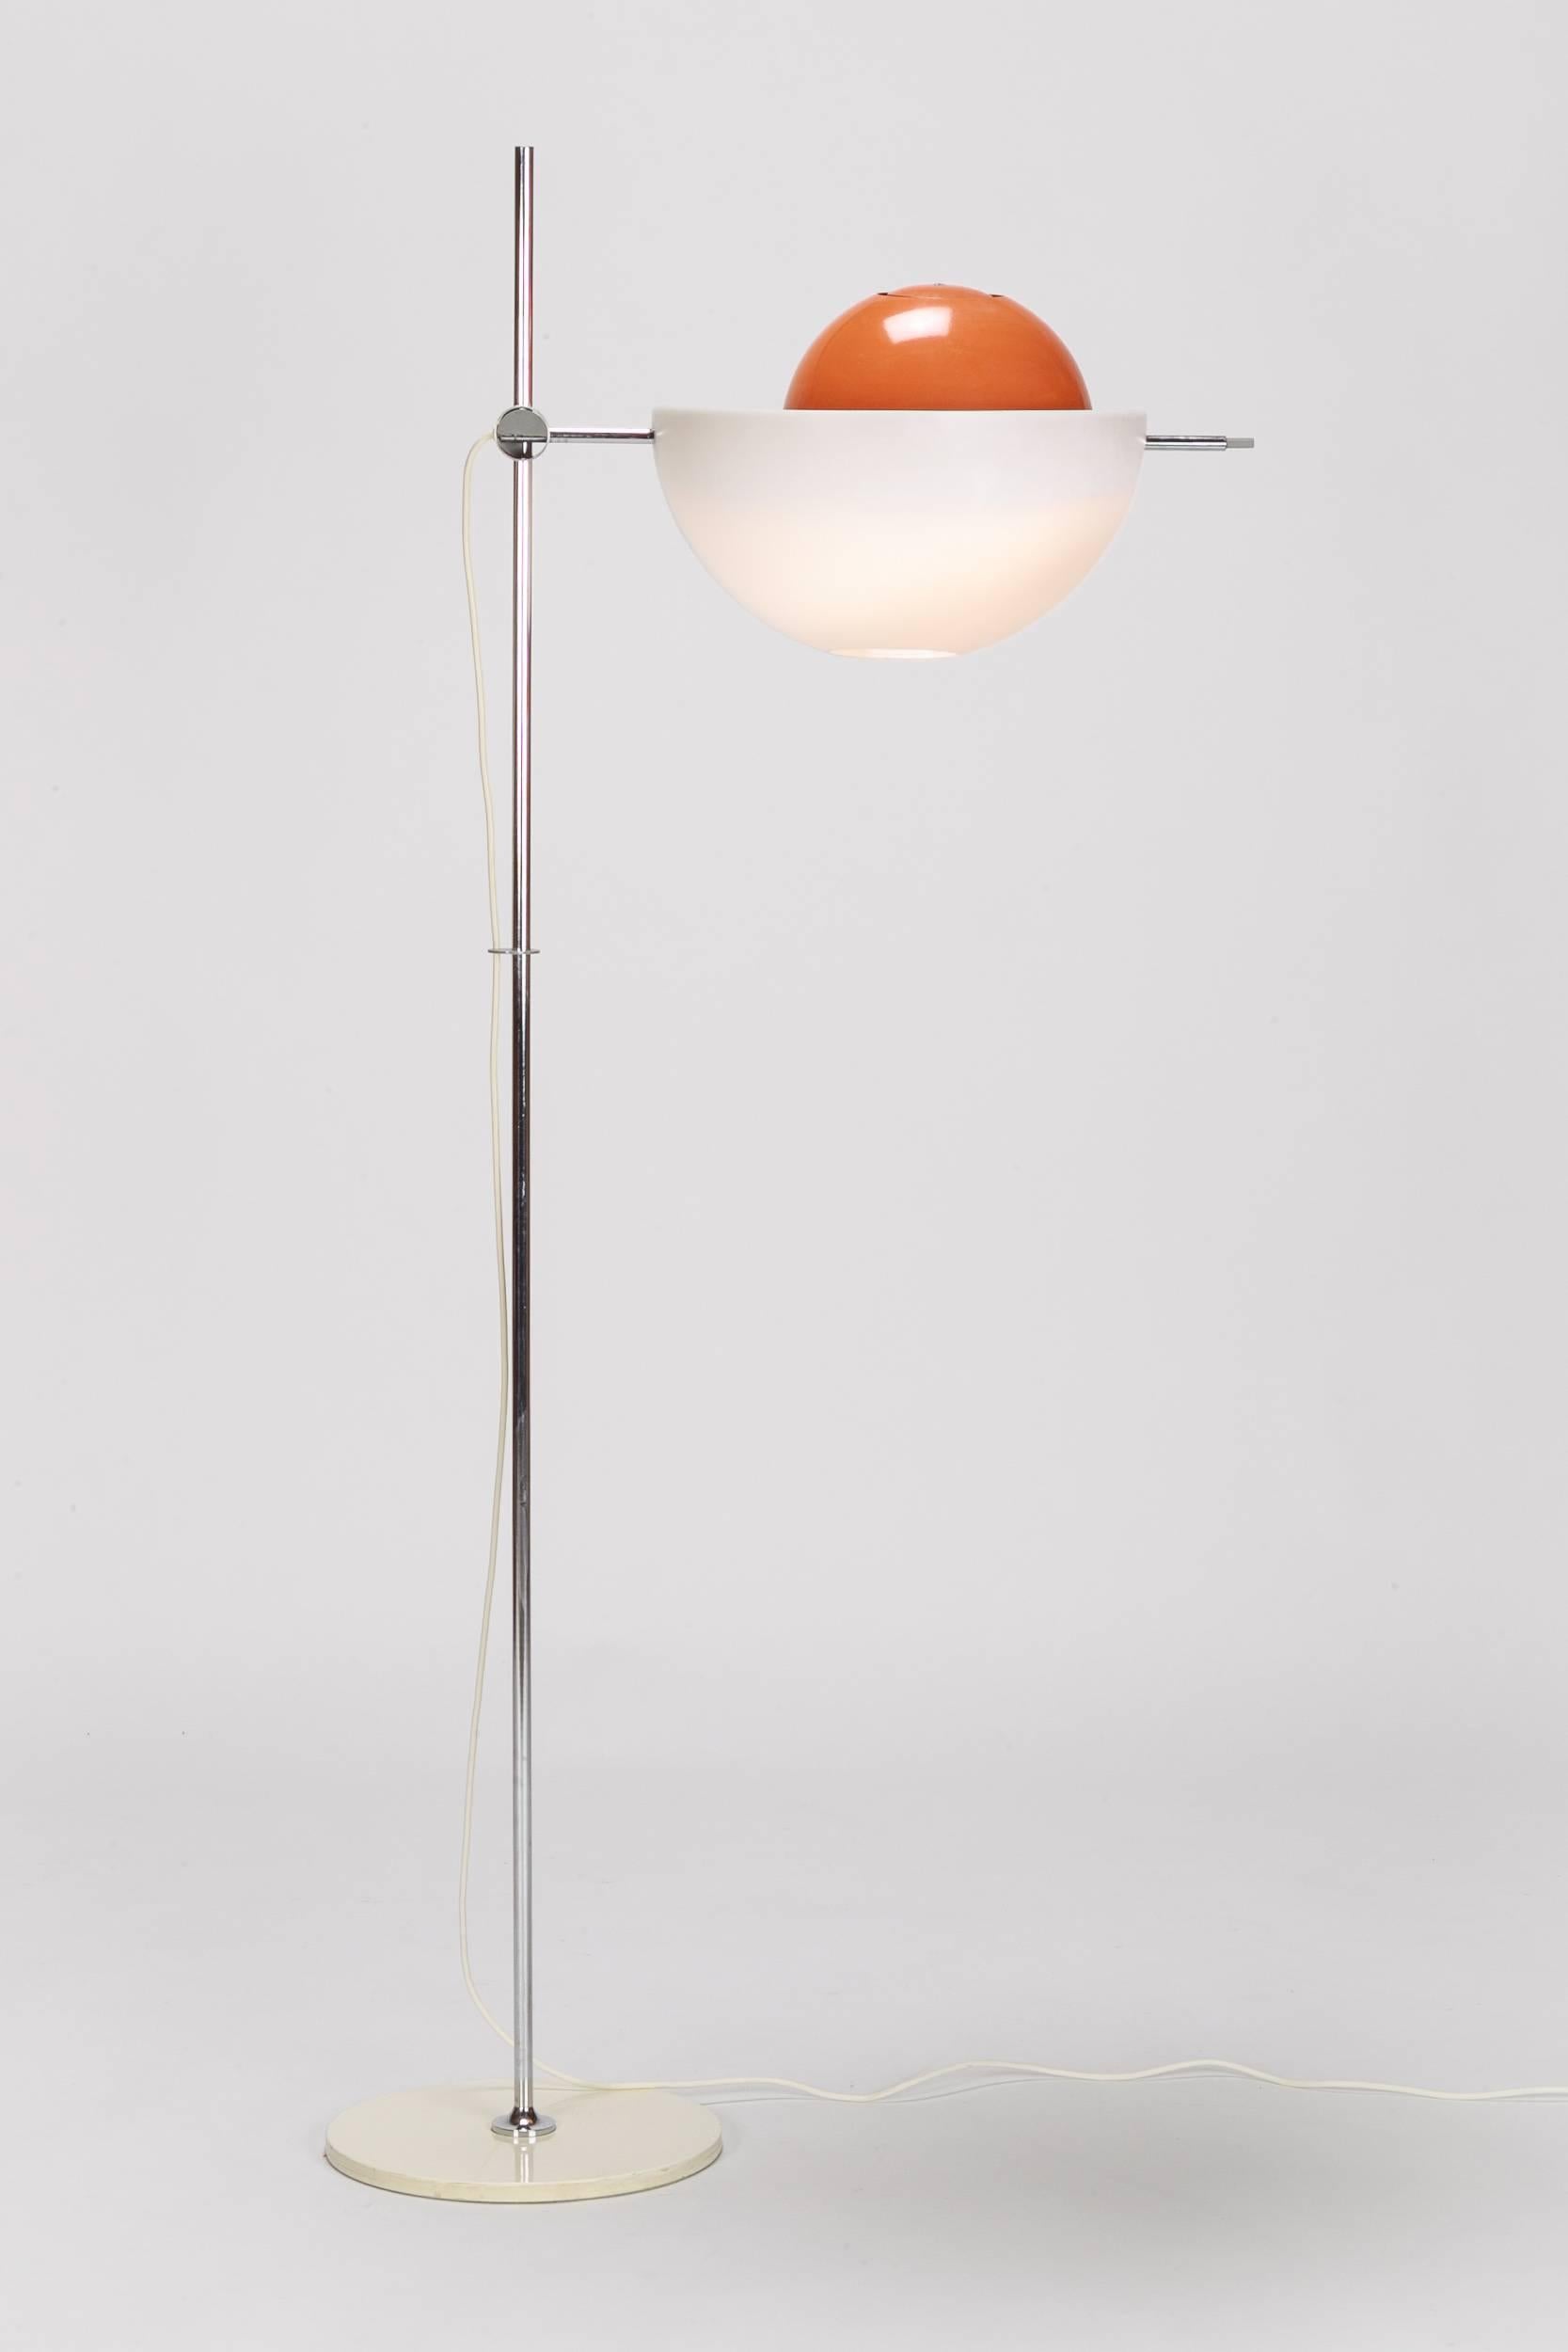 A wonderful and very rare to find floor lamp Type 300, designed by Rico and Rosemarie Baltensweiler, introduced in 1971 by the Baltensweiler manufacture in Switzerland.  This is a rarely seen version with an original orange colored hemishpere which